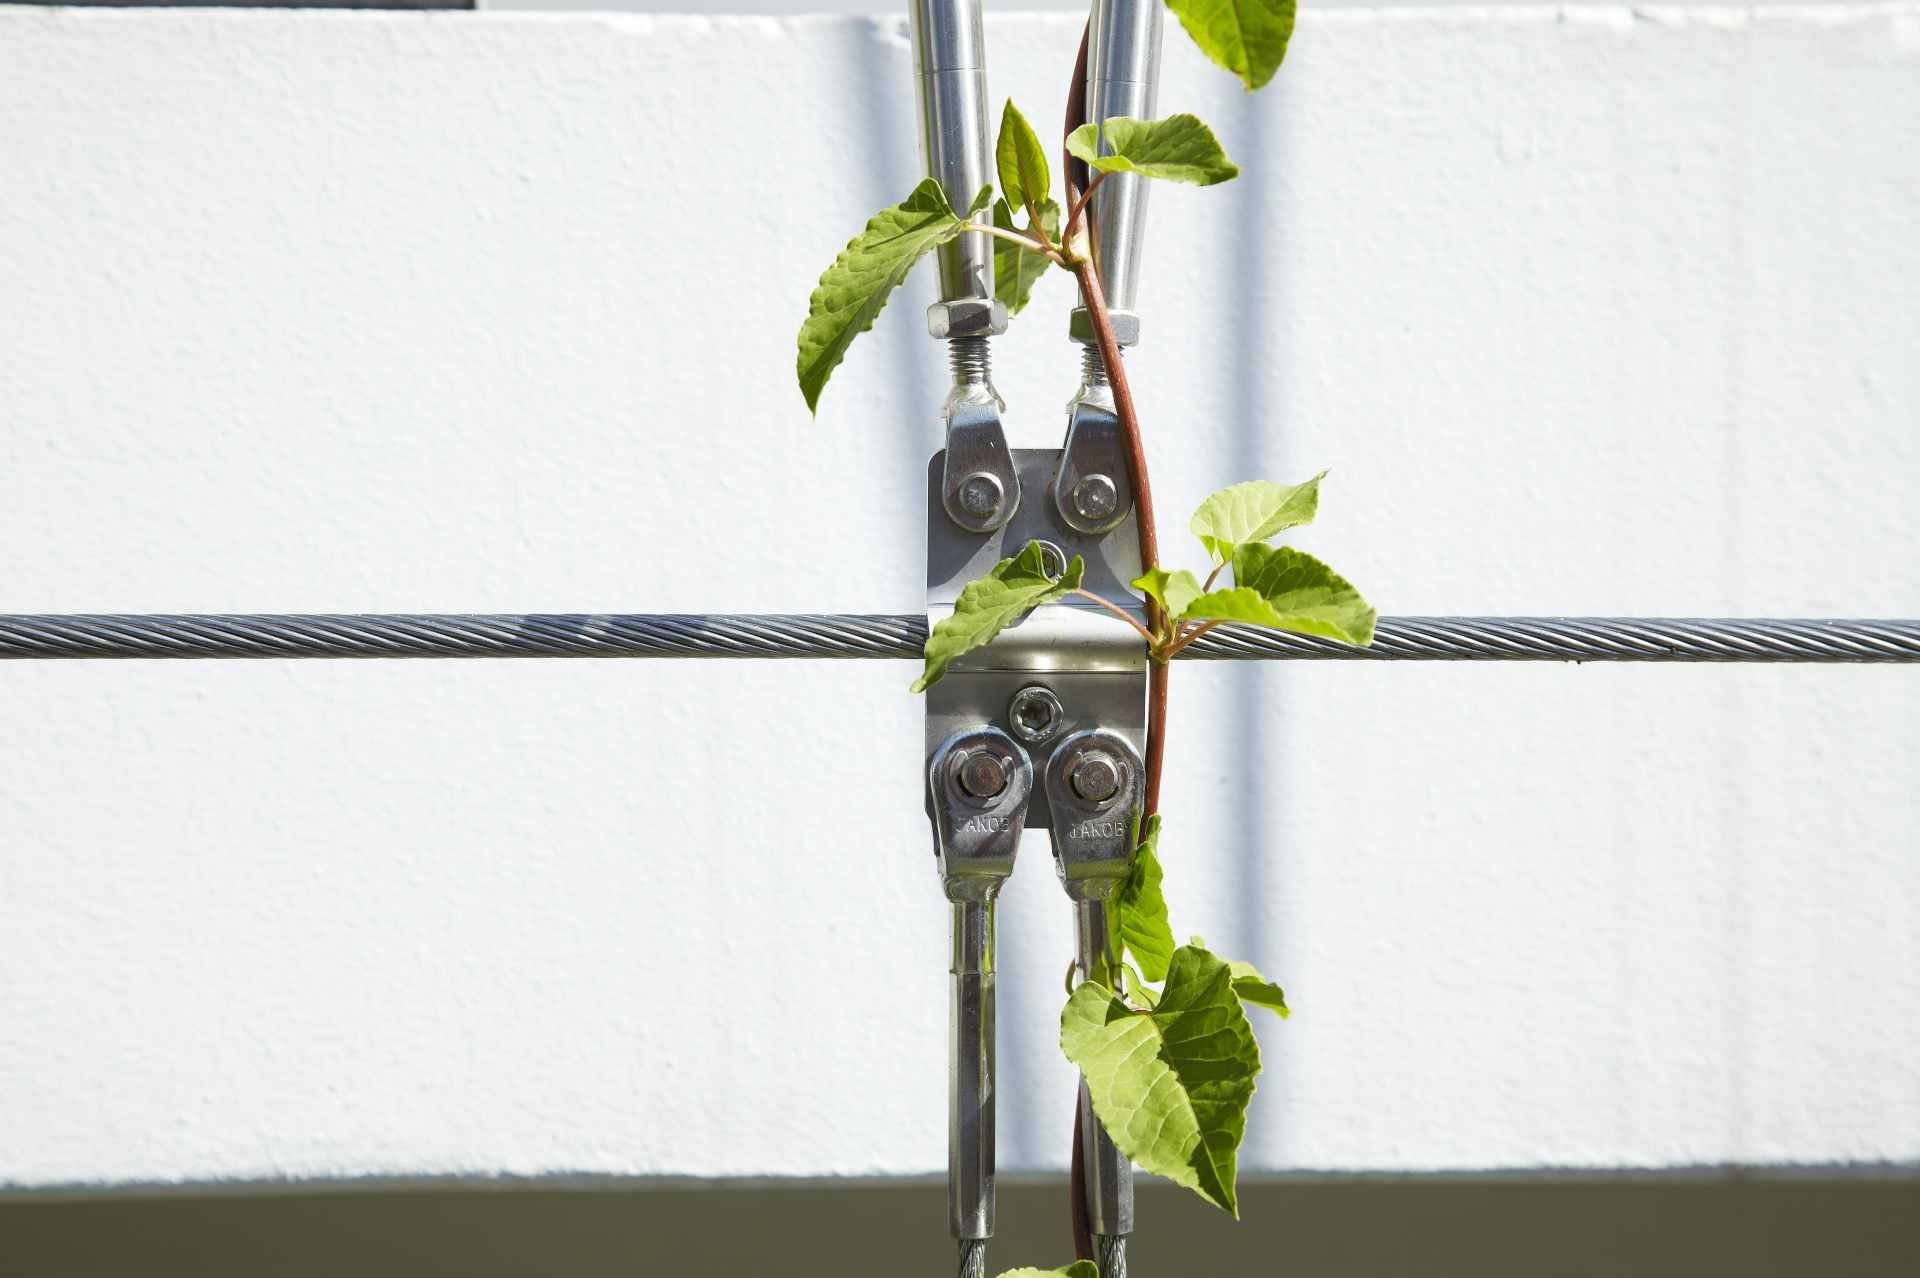 A young plant shoot growing on a Jakob stainless steel cable